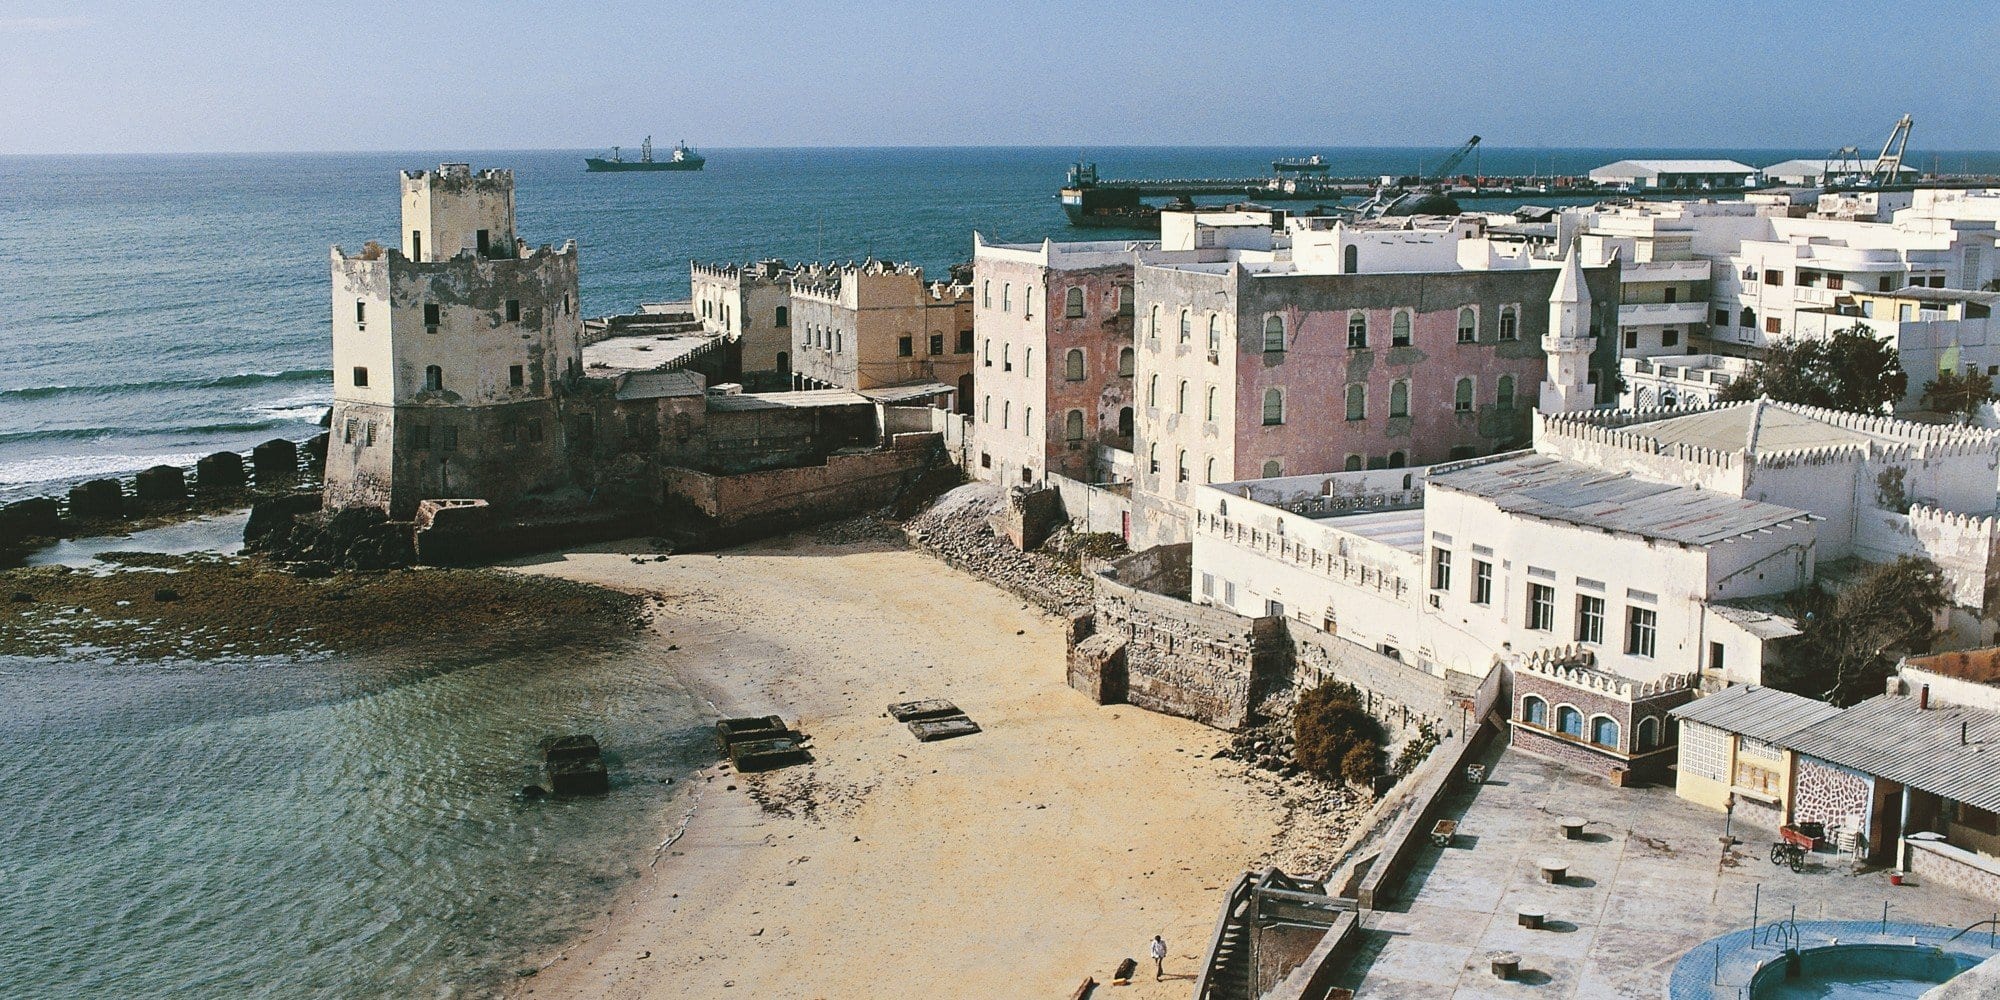 Top Things to See and Do in Mogadishu